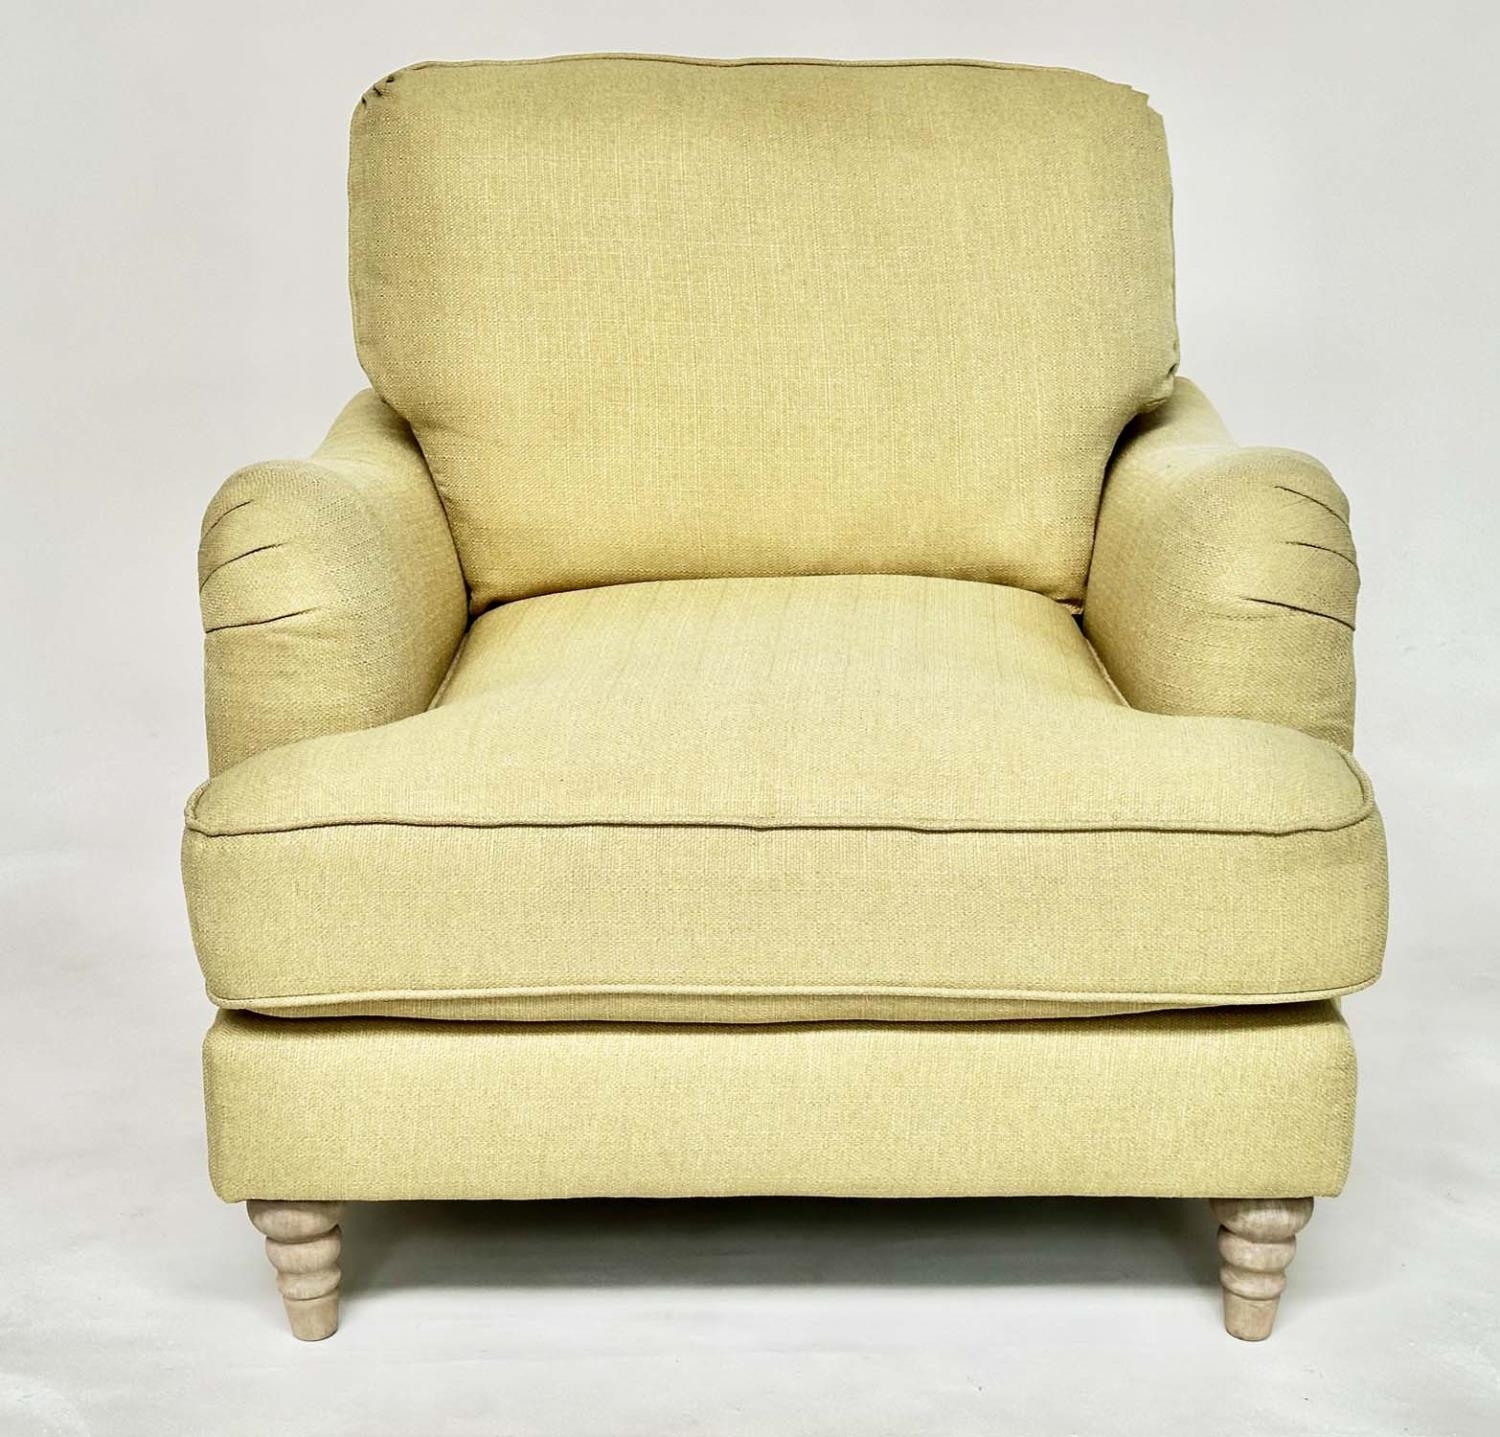 COUNTRY HOUSE ARMCHAIR, Howard and Son style Bridgewater model inspired with primrose yellow slub - Image 5 of 8